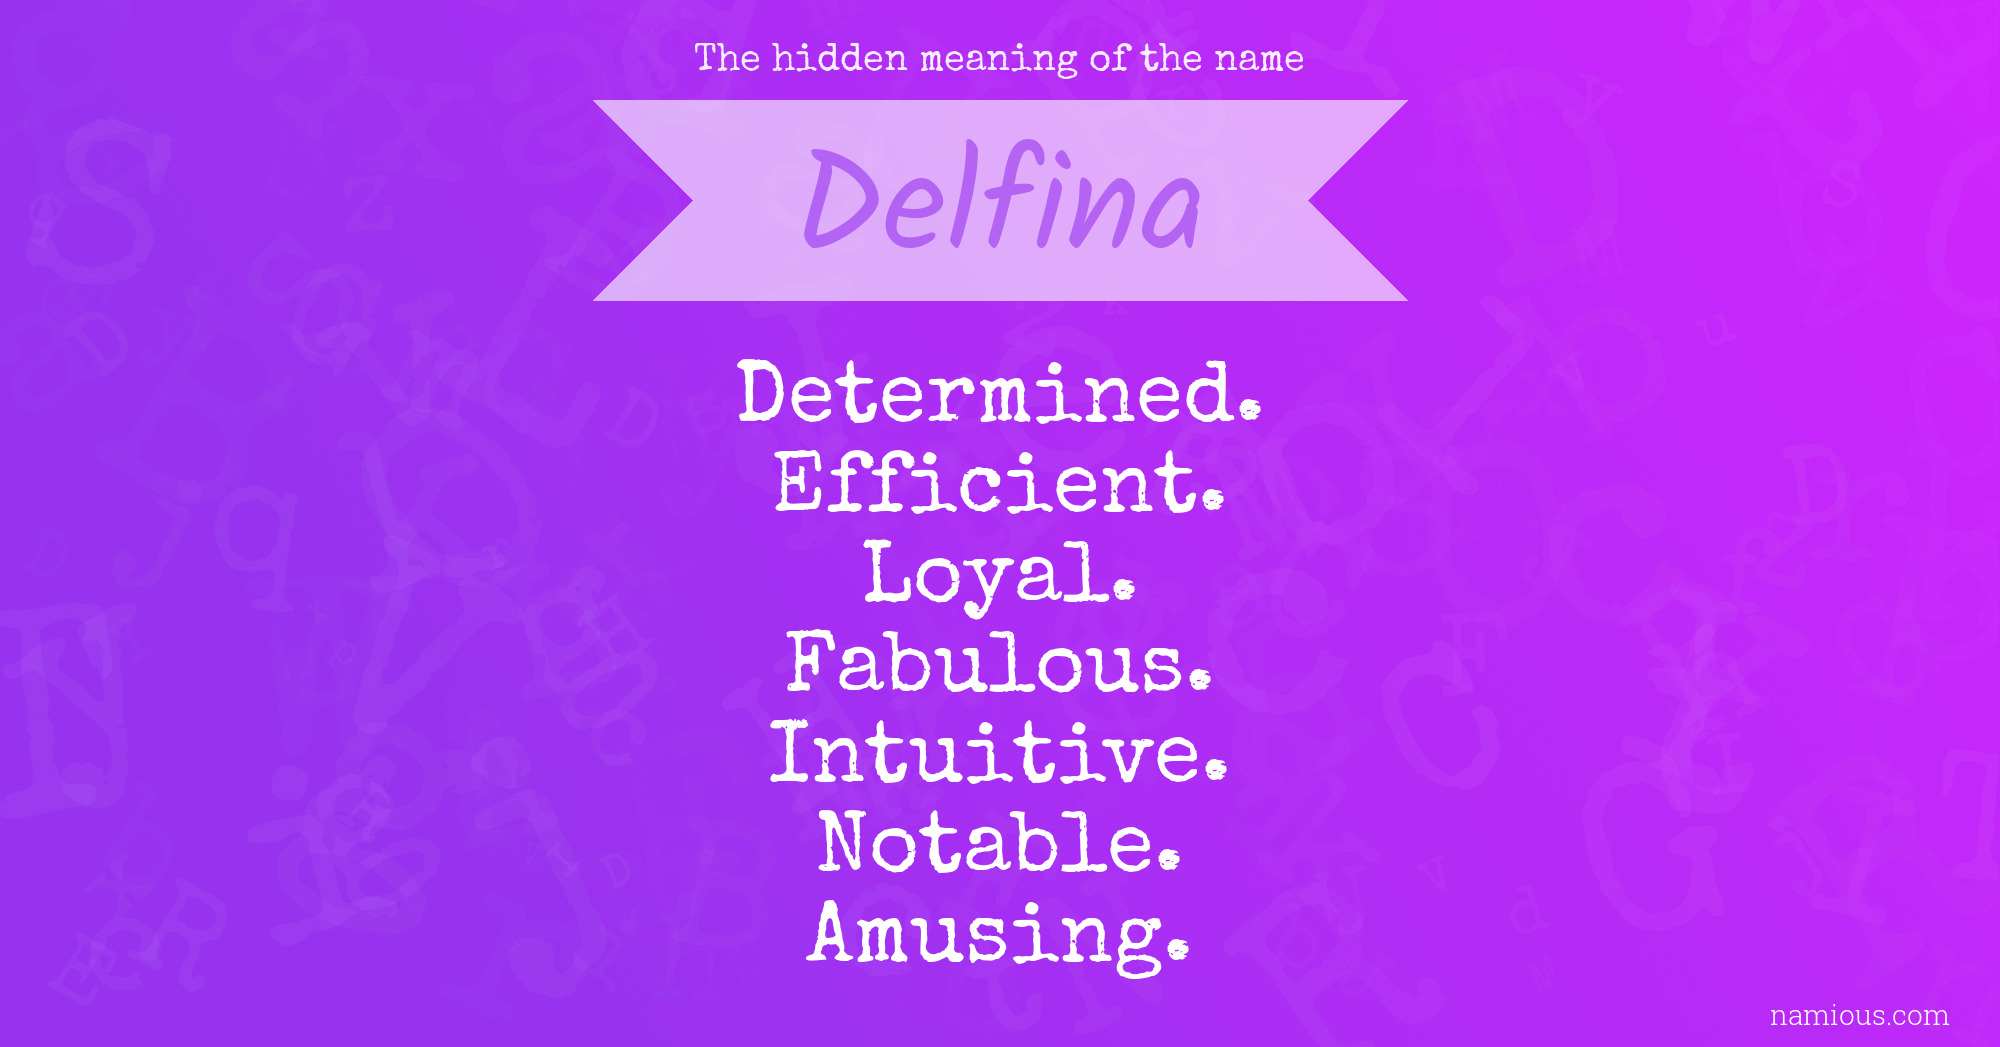 The hidden meaning of the name Delfina